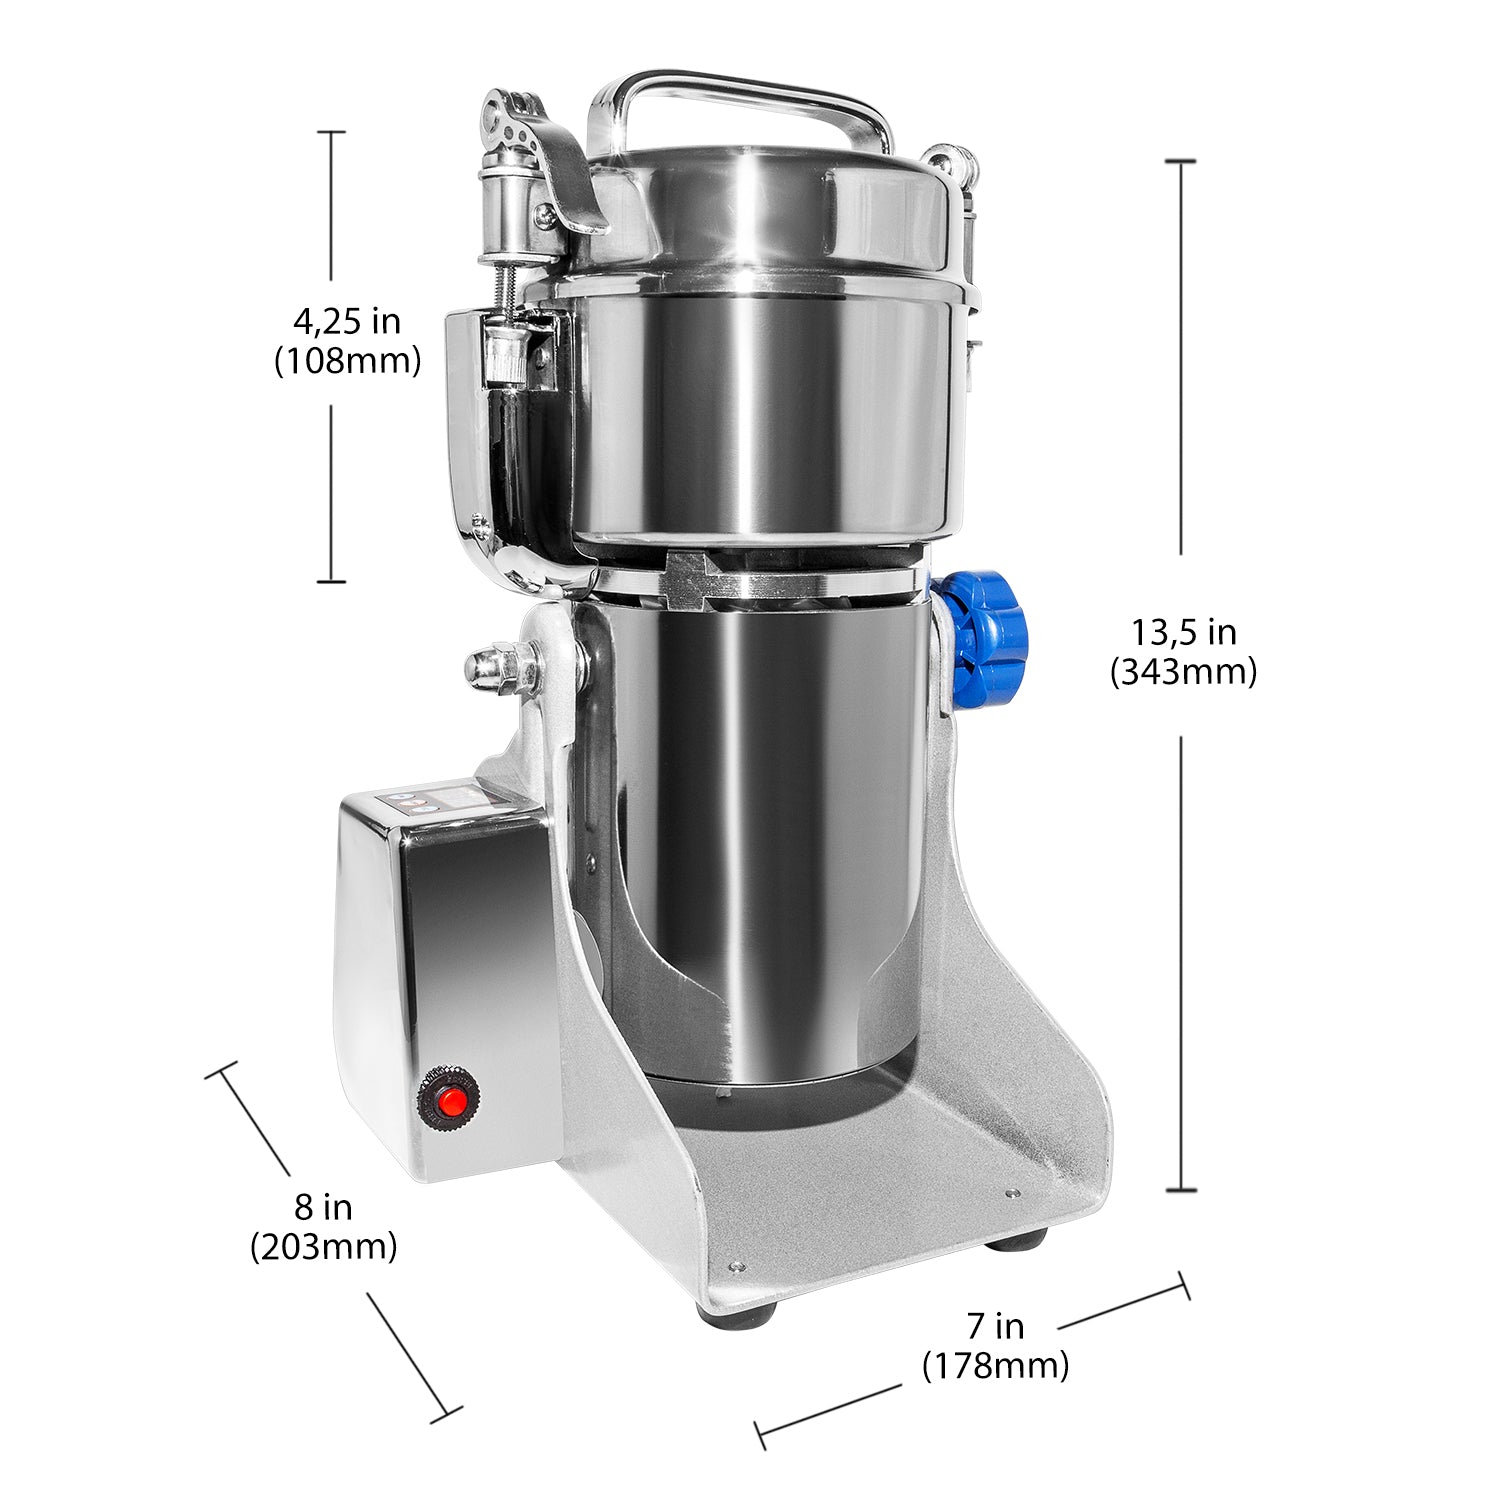 ALDKitchen Electric Grain Mill Commercial | 1000g | Swing Type Grain Grinder Mill | Stainless Steel 110V